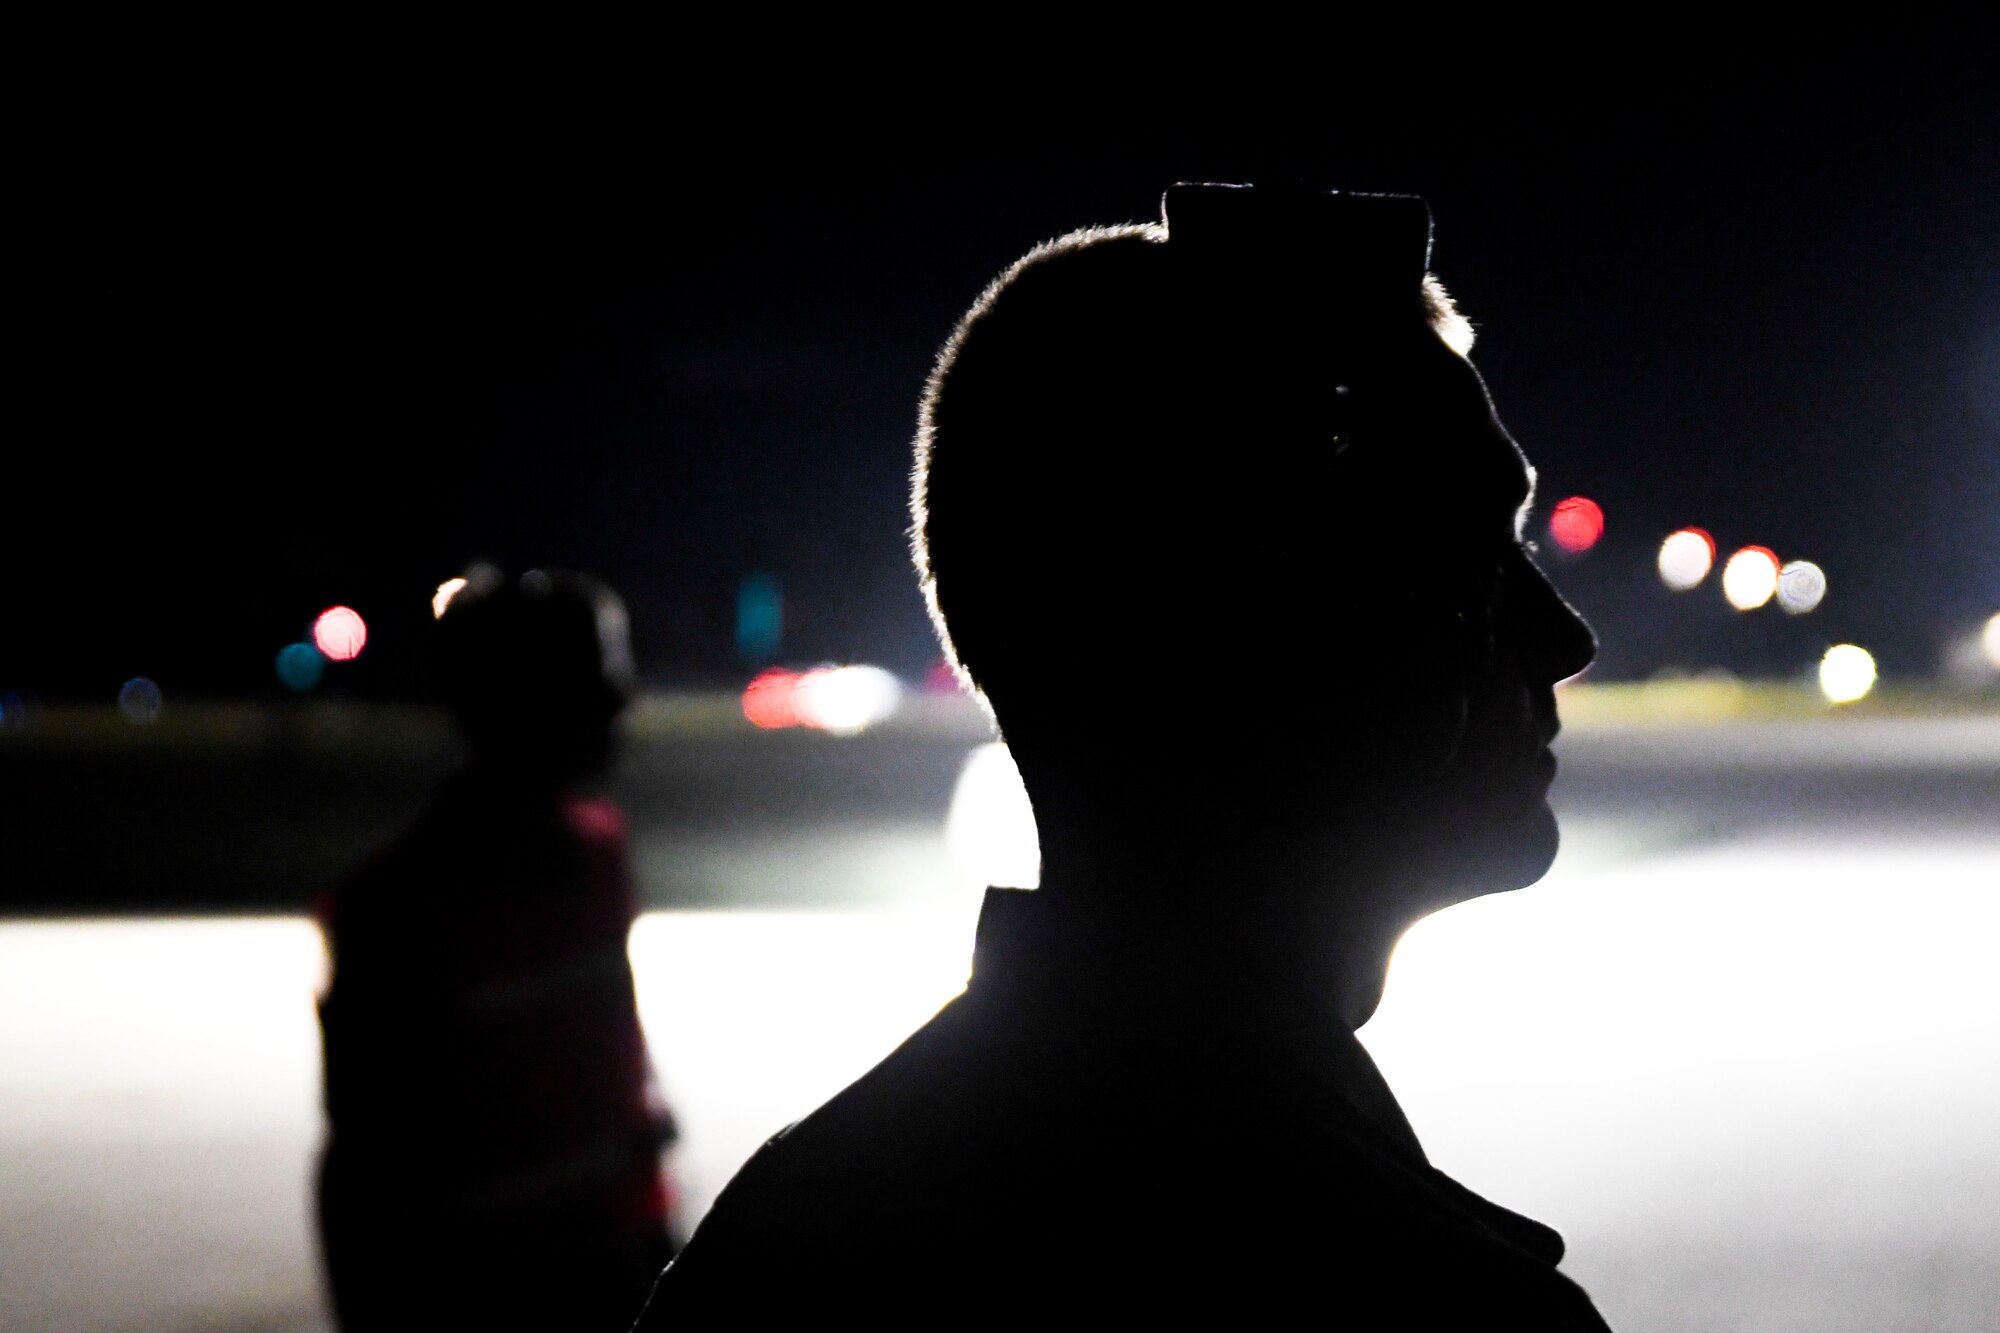 A photo of two airmen standing on the flight line at night